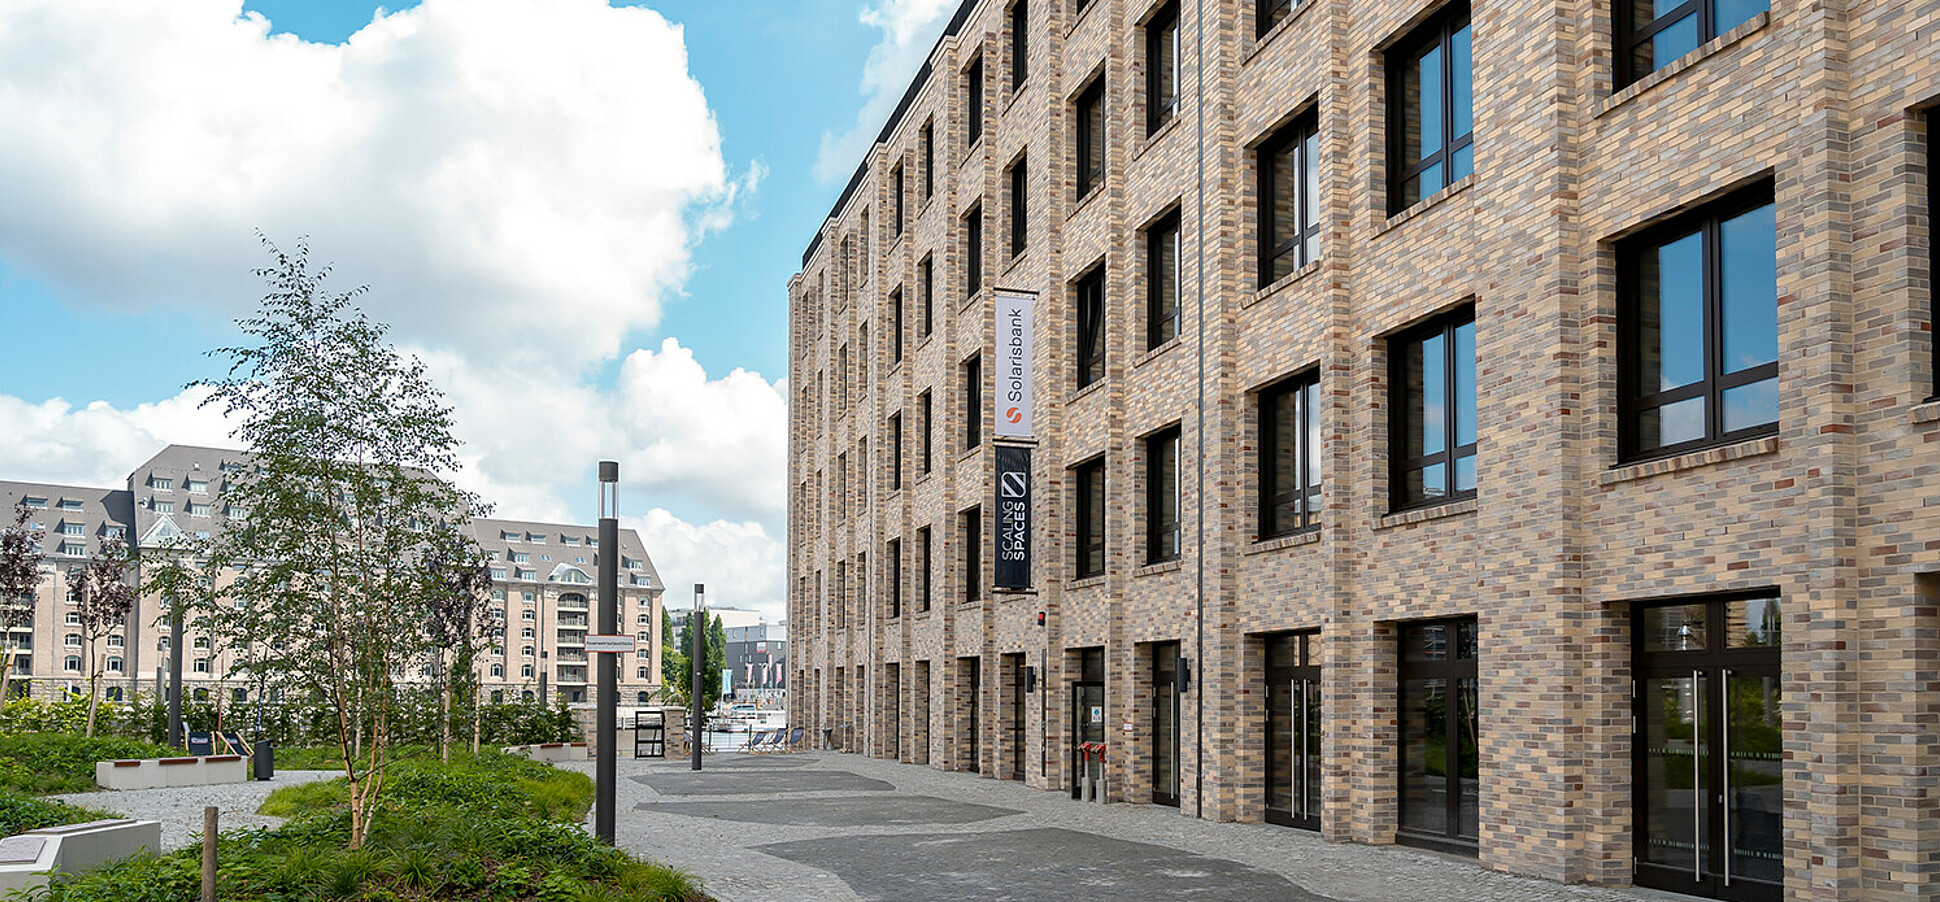 A modern brick building in Berlin is home to Solaris Group